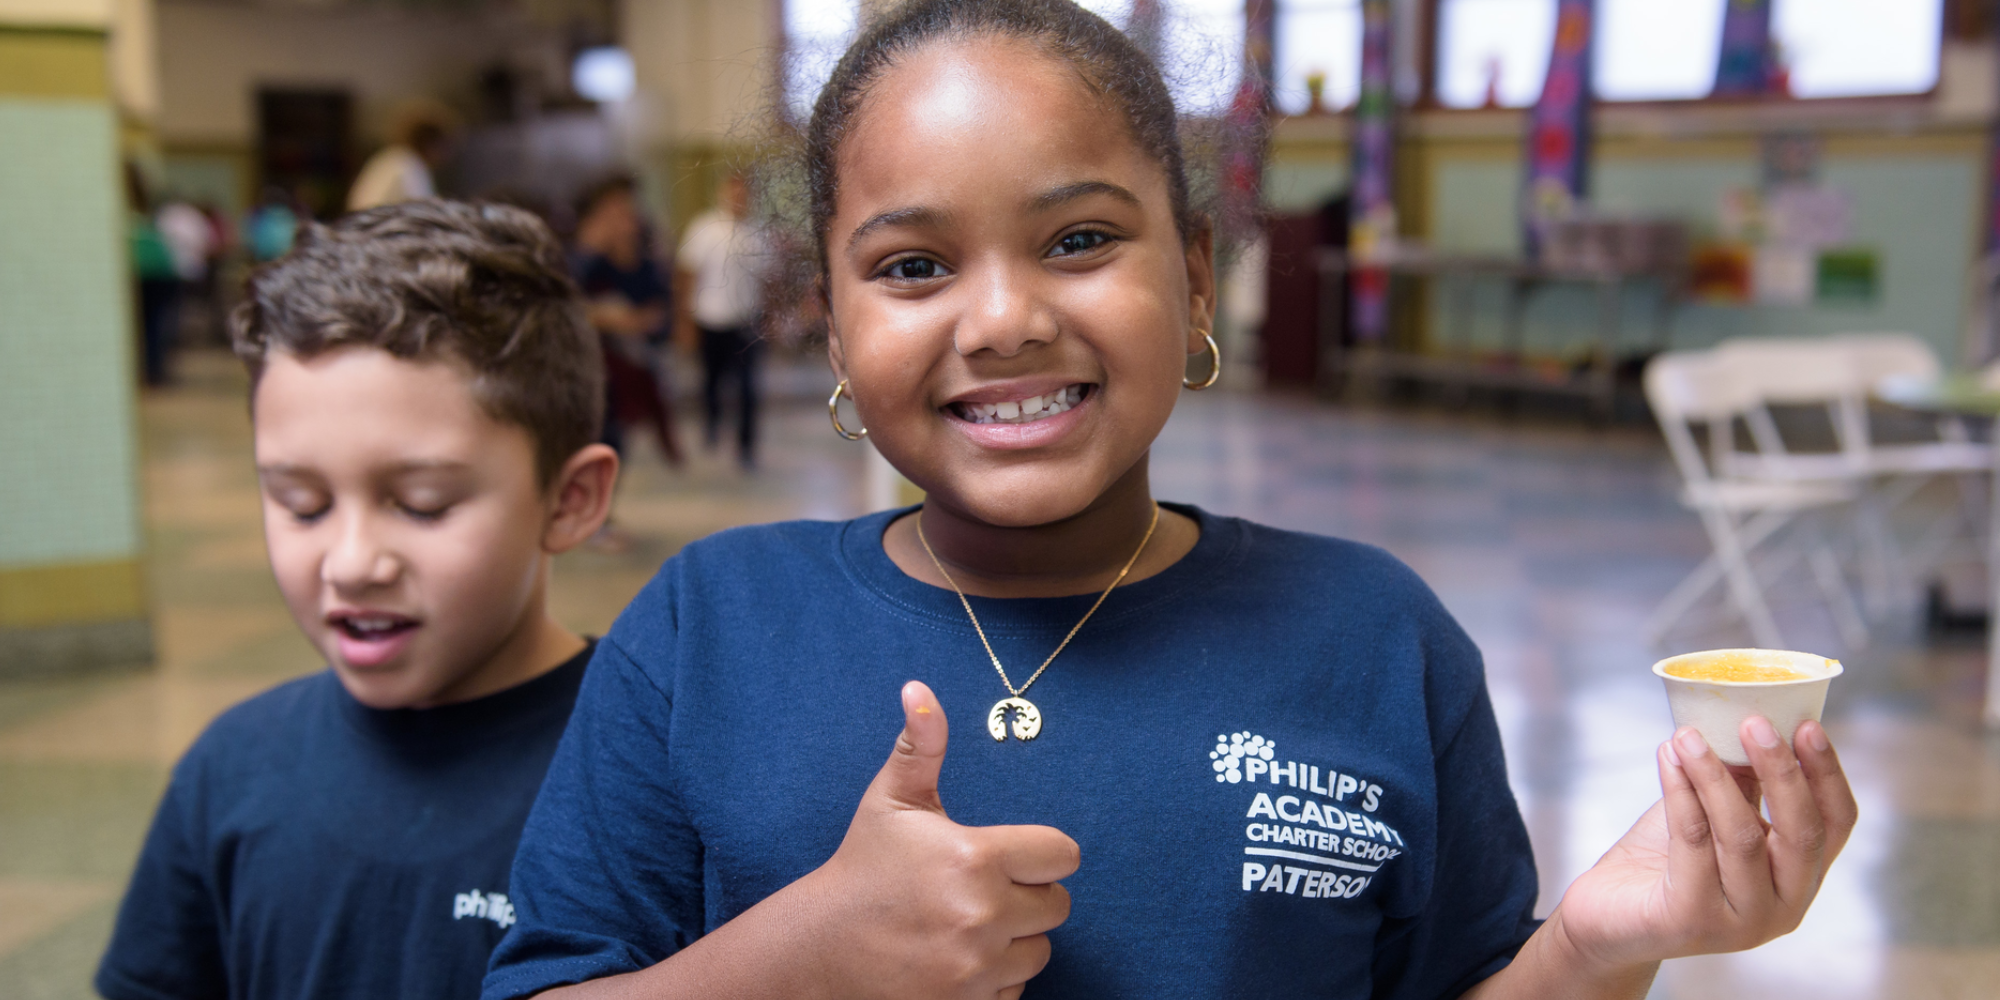 A smiling elementary-aged student wearing a blue school t-shirt holds a sample cup of butternut squash soup and gives a thumbs-up. A student next to them reacts to their own sample of squash during the taste test.